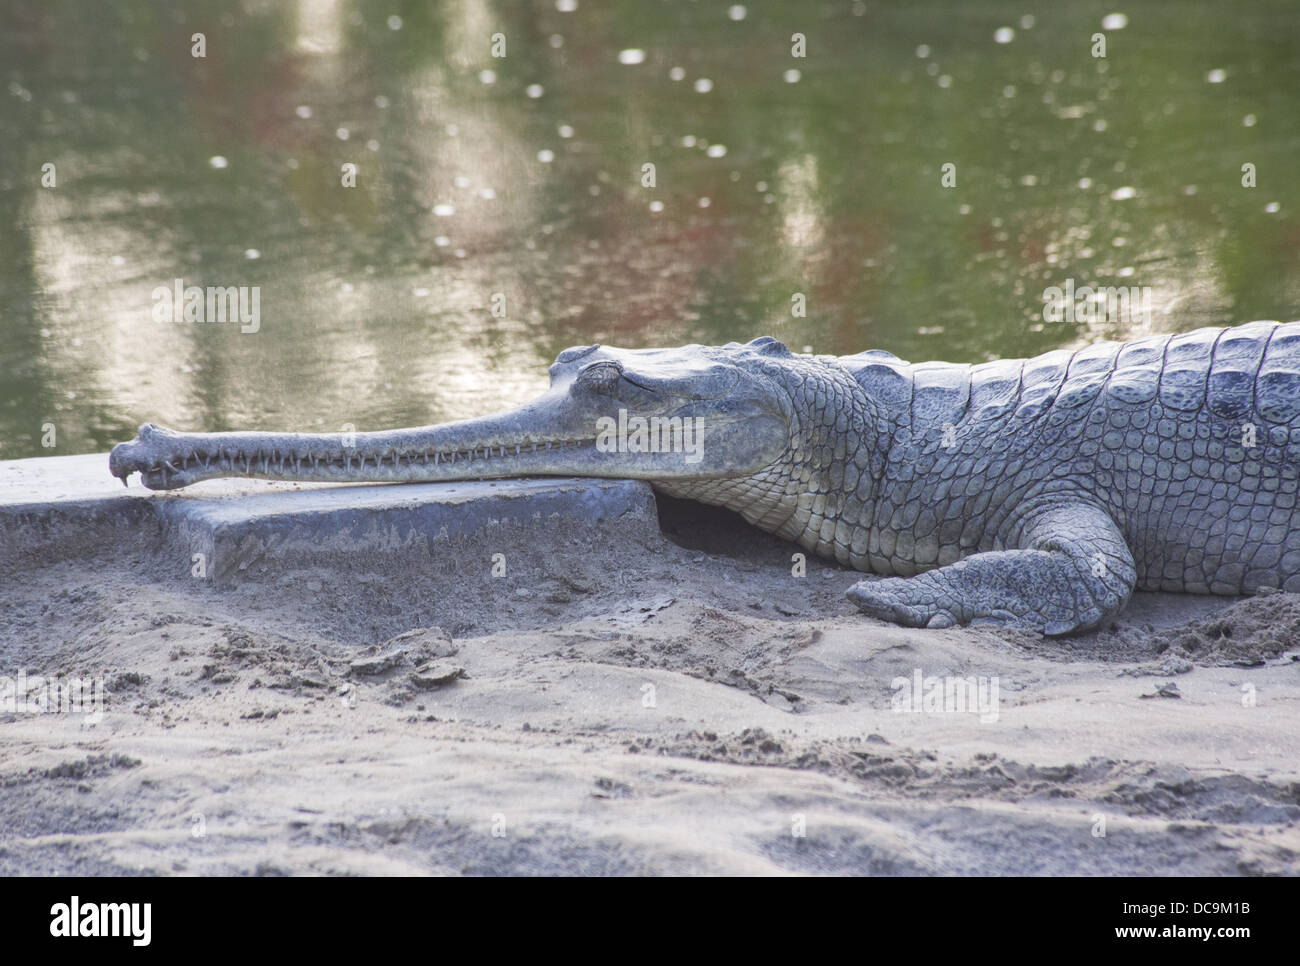 Gharial (Gavialis gangeticus) at the crocodile breeding centre in Bardia National Park, Nepal Stock Photo